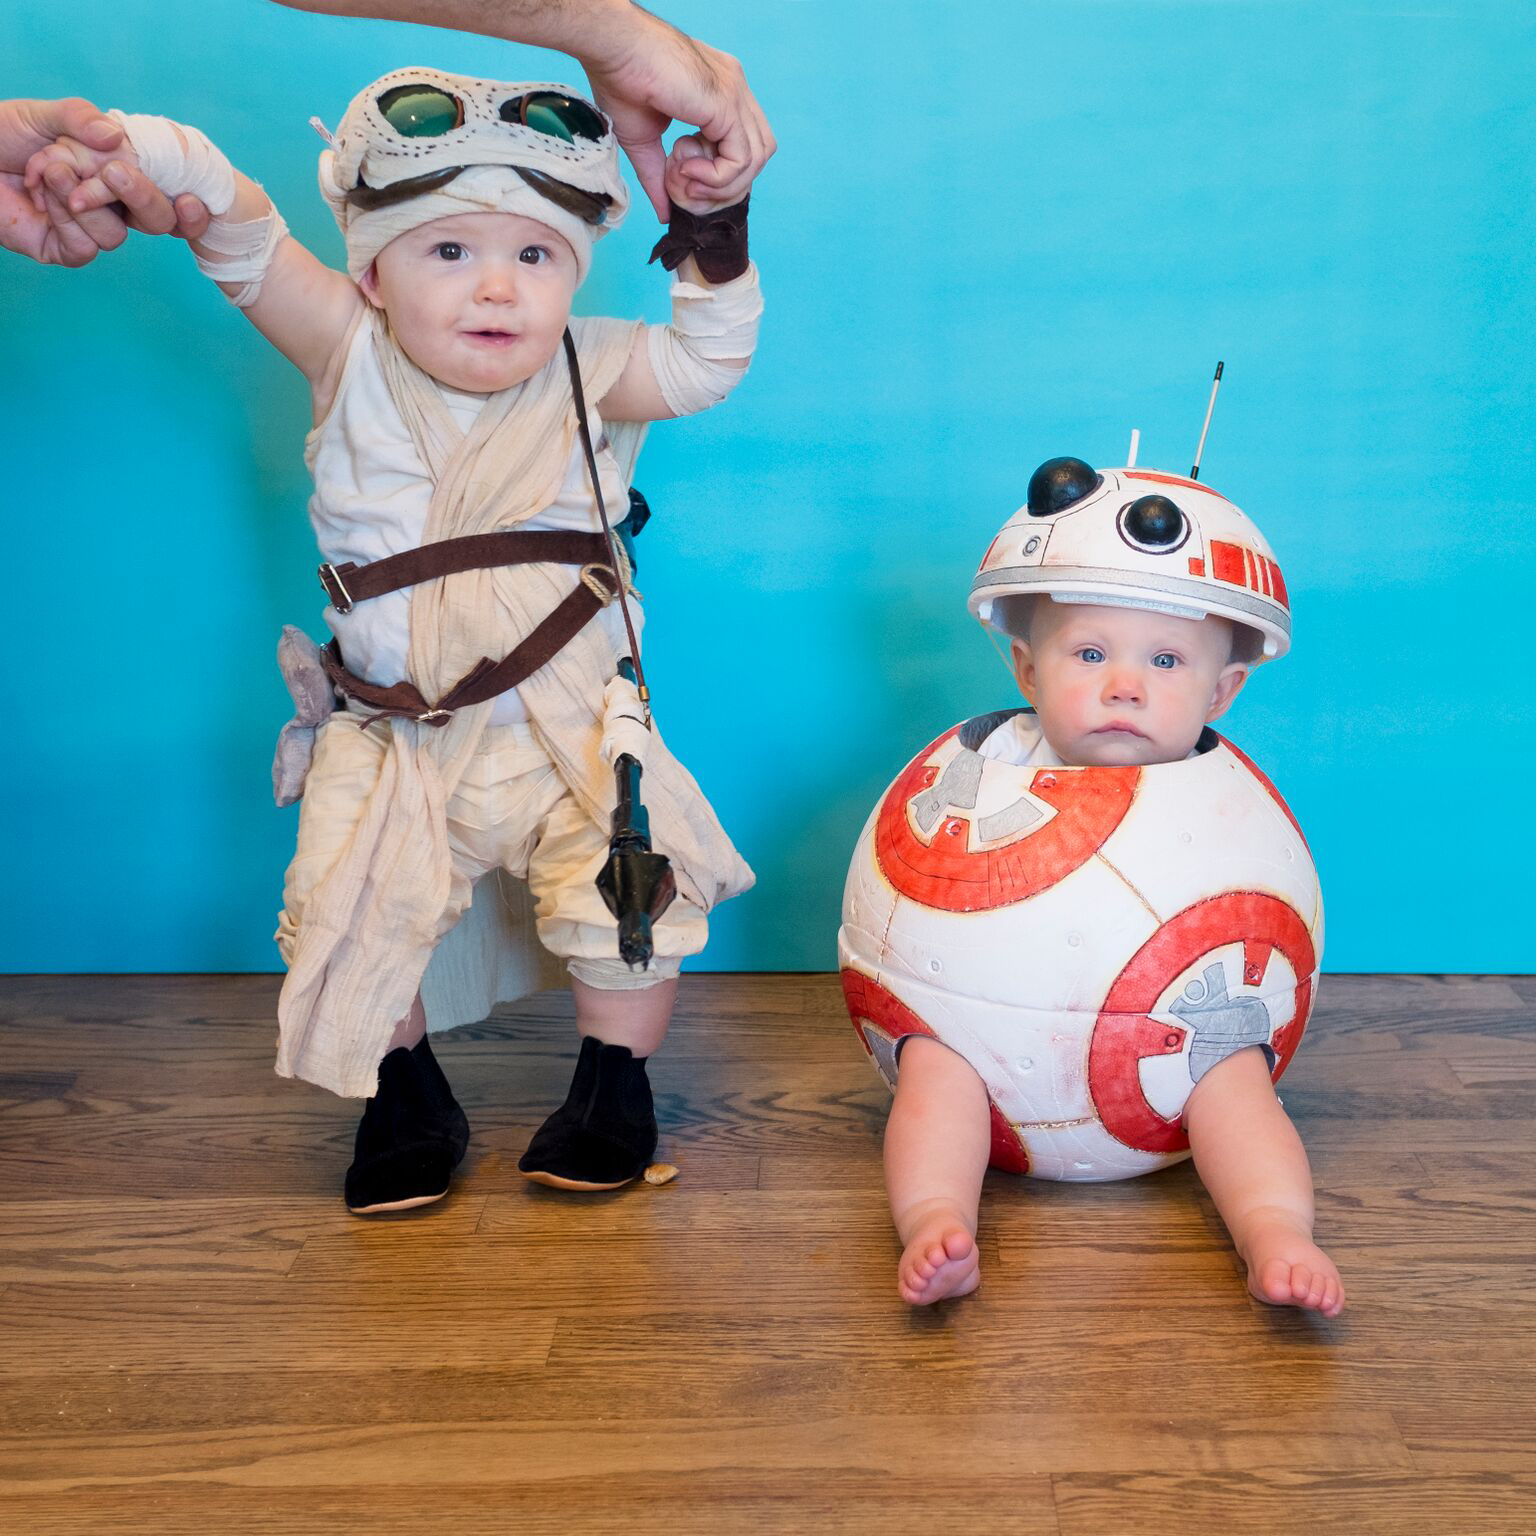 PHOTO: Lera and Marigold Mancke, 8-month-old twins, pose as characters from "Star Wars."